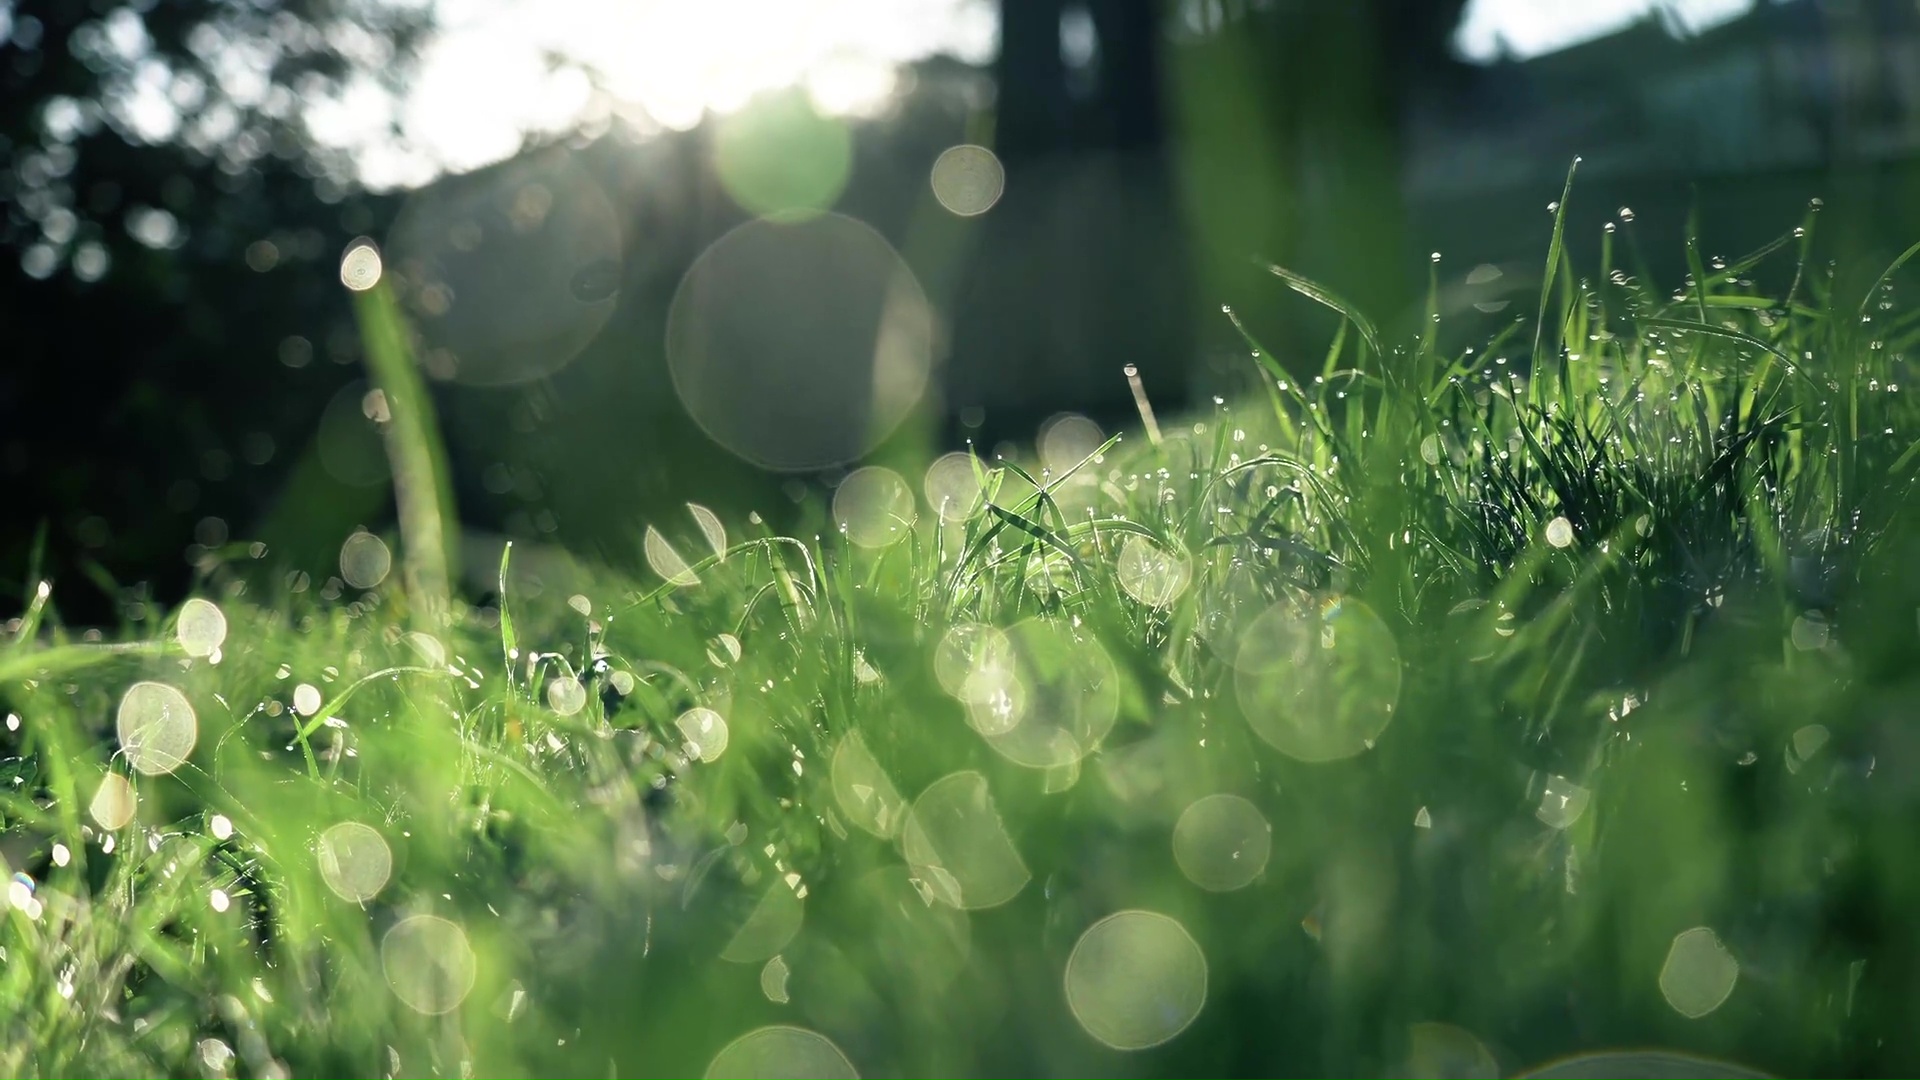 Natural Green Grass In The Morning Live Wallpaper - HDLiveWall.com